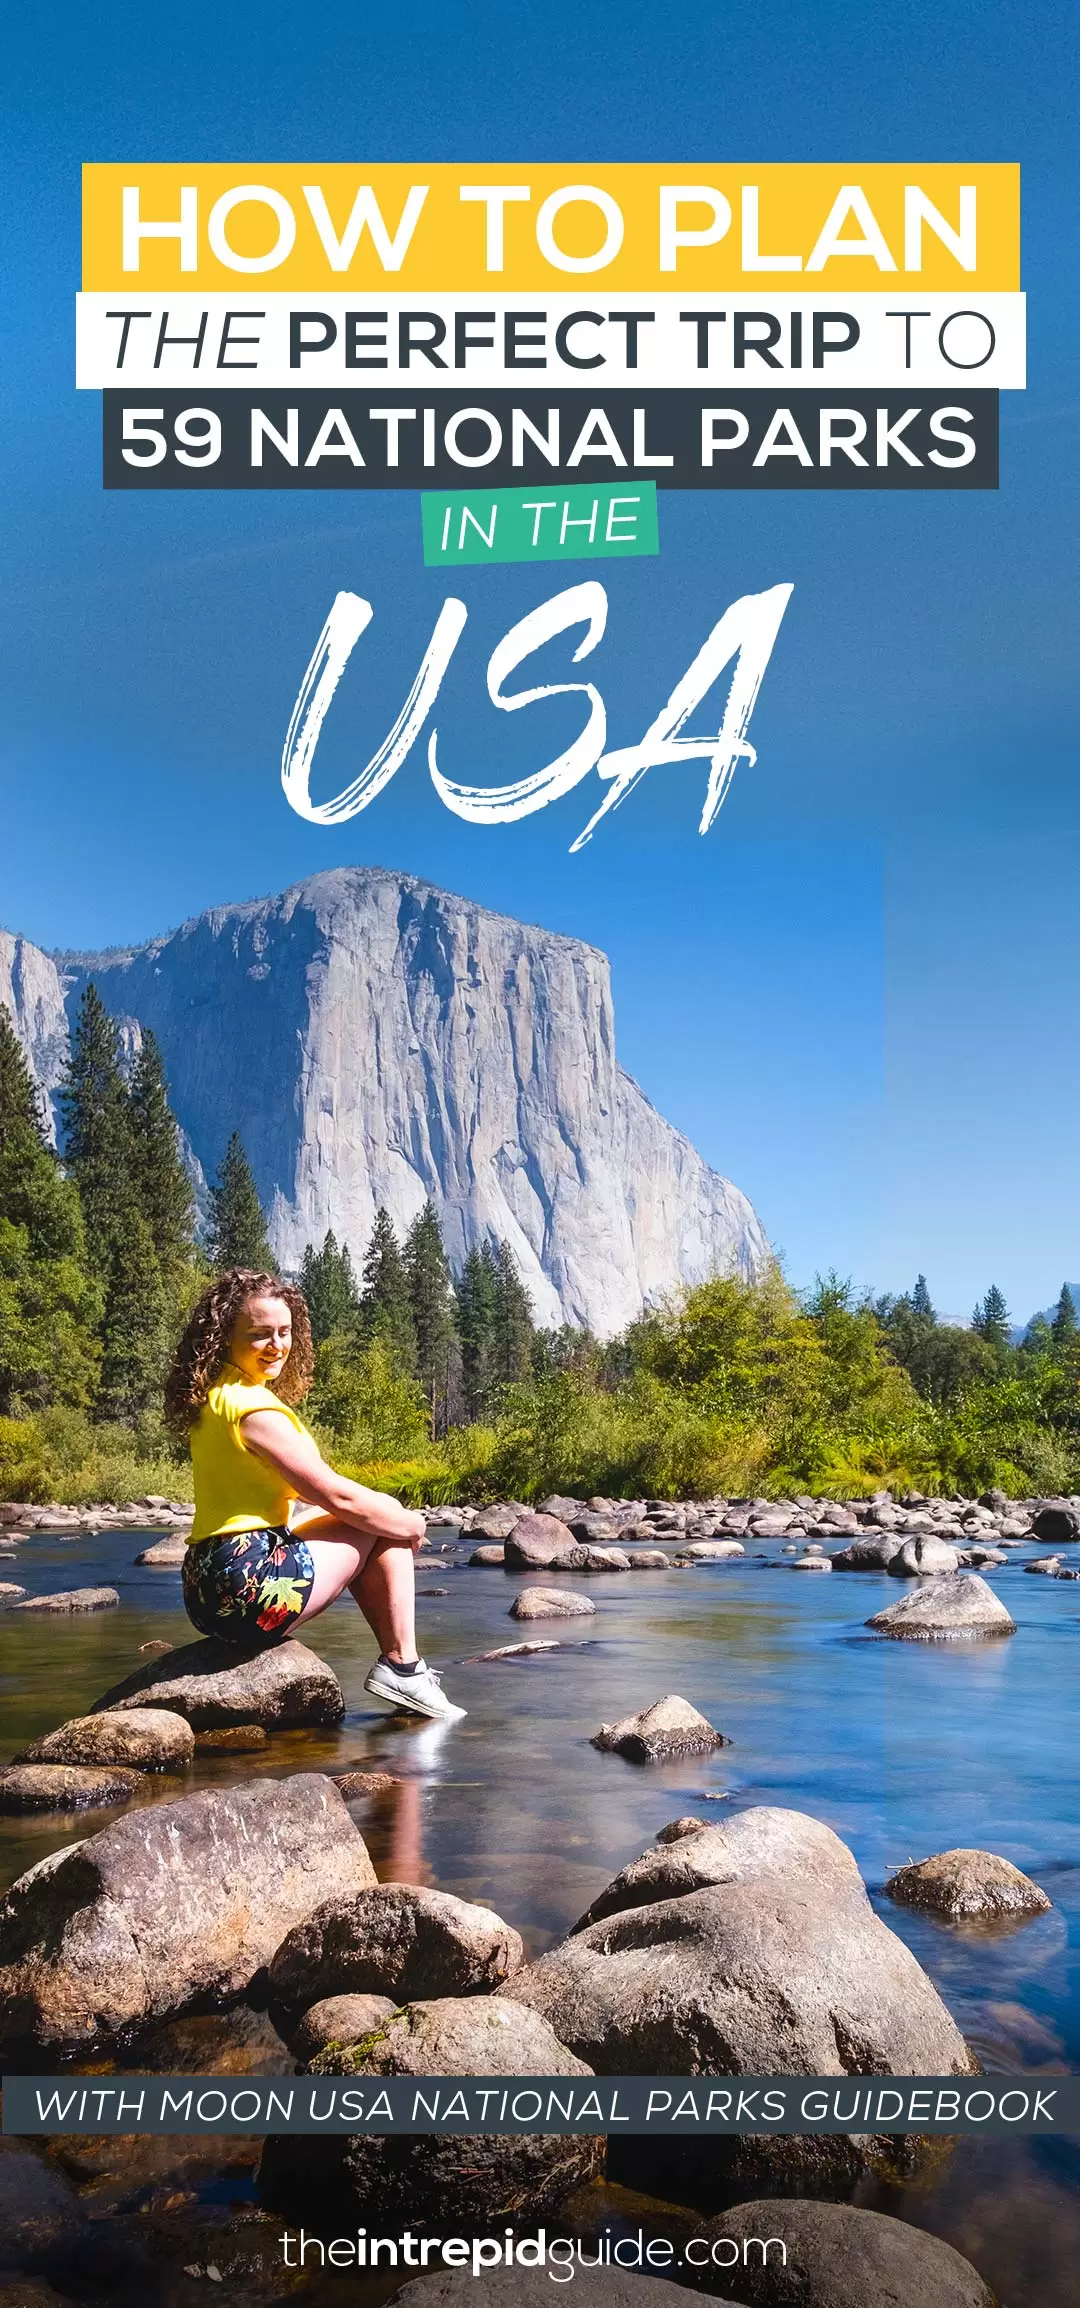 How to plan a trip to 59 National Parks with the USA with Moon USA National Parks Guidebook